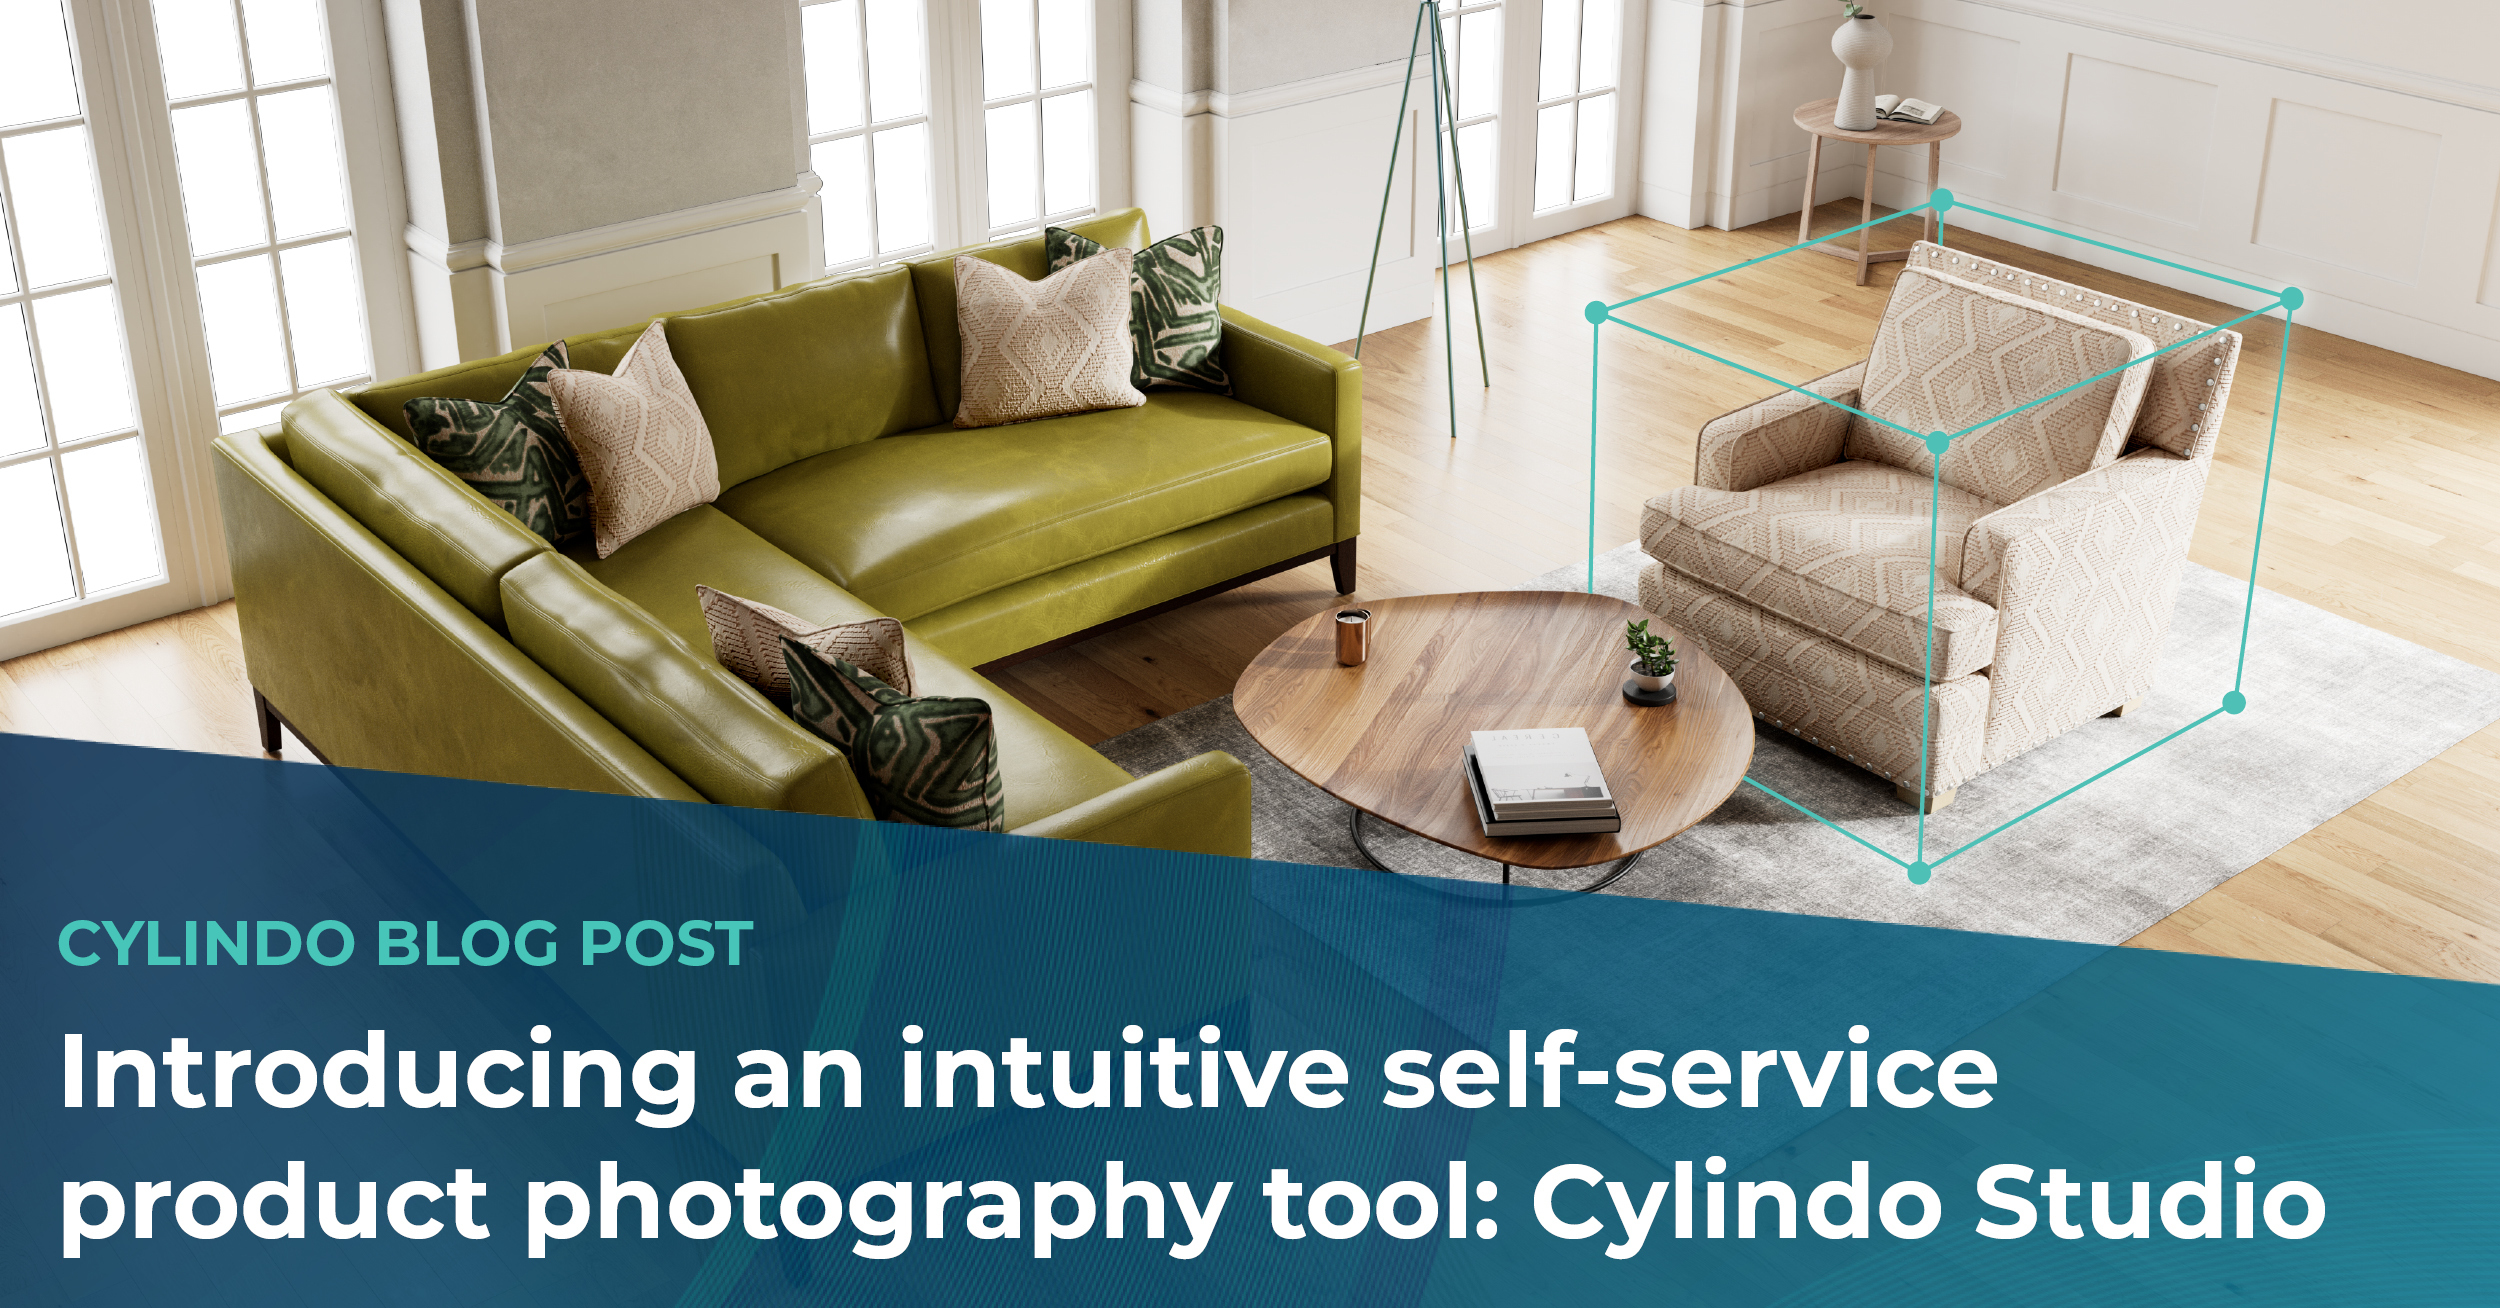 Introducing an intuitive self-service product photography tool: Cylindo Studio